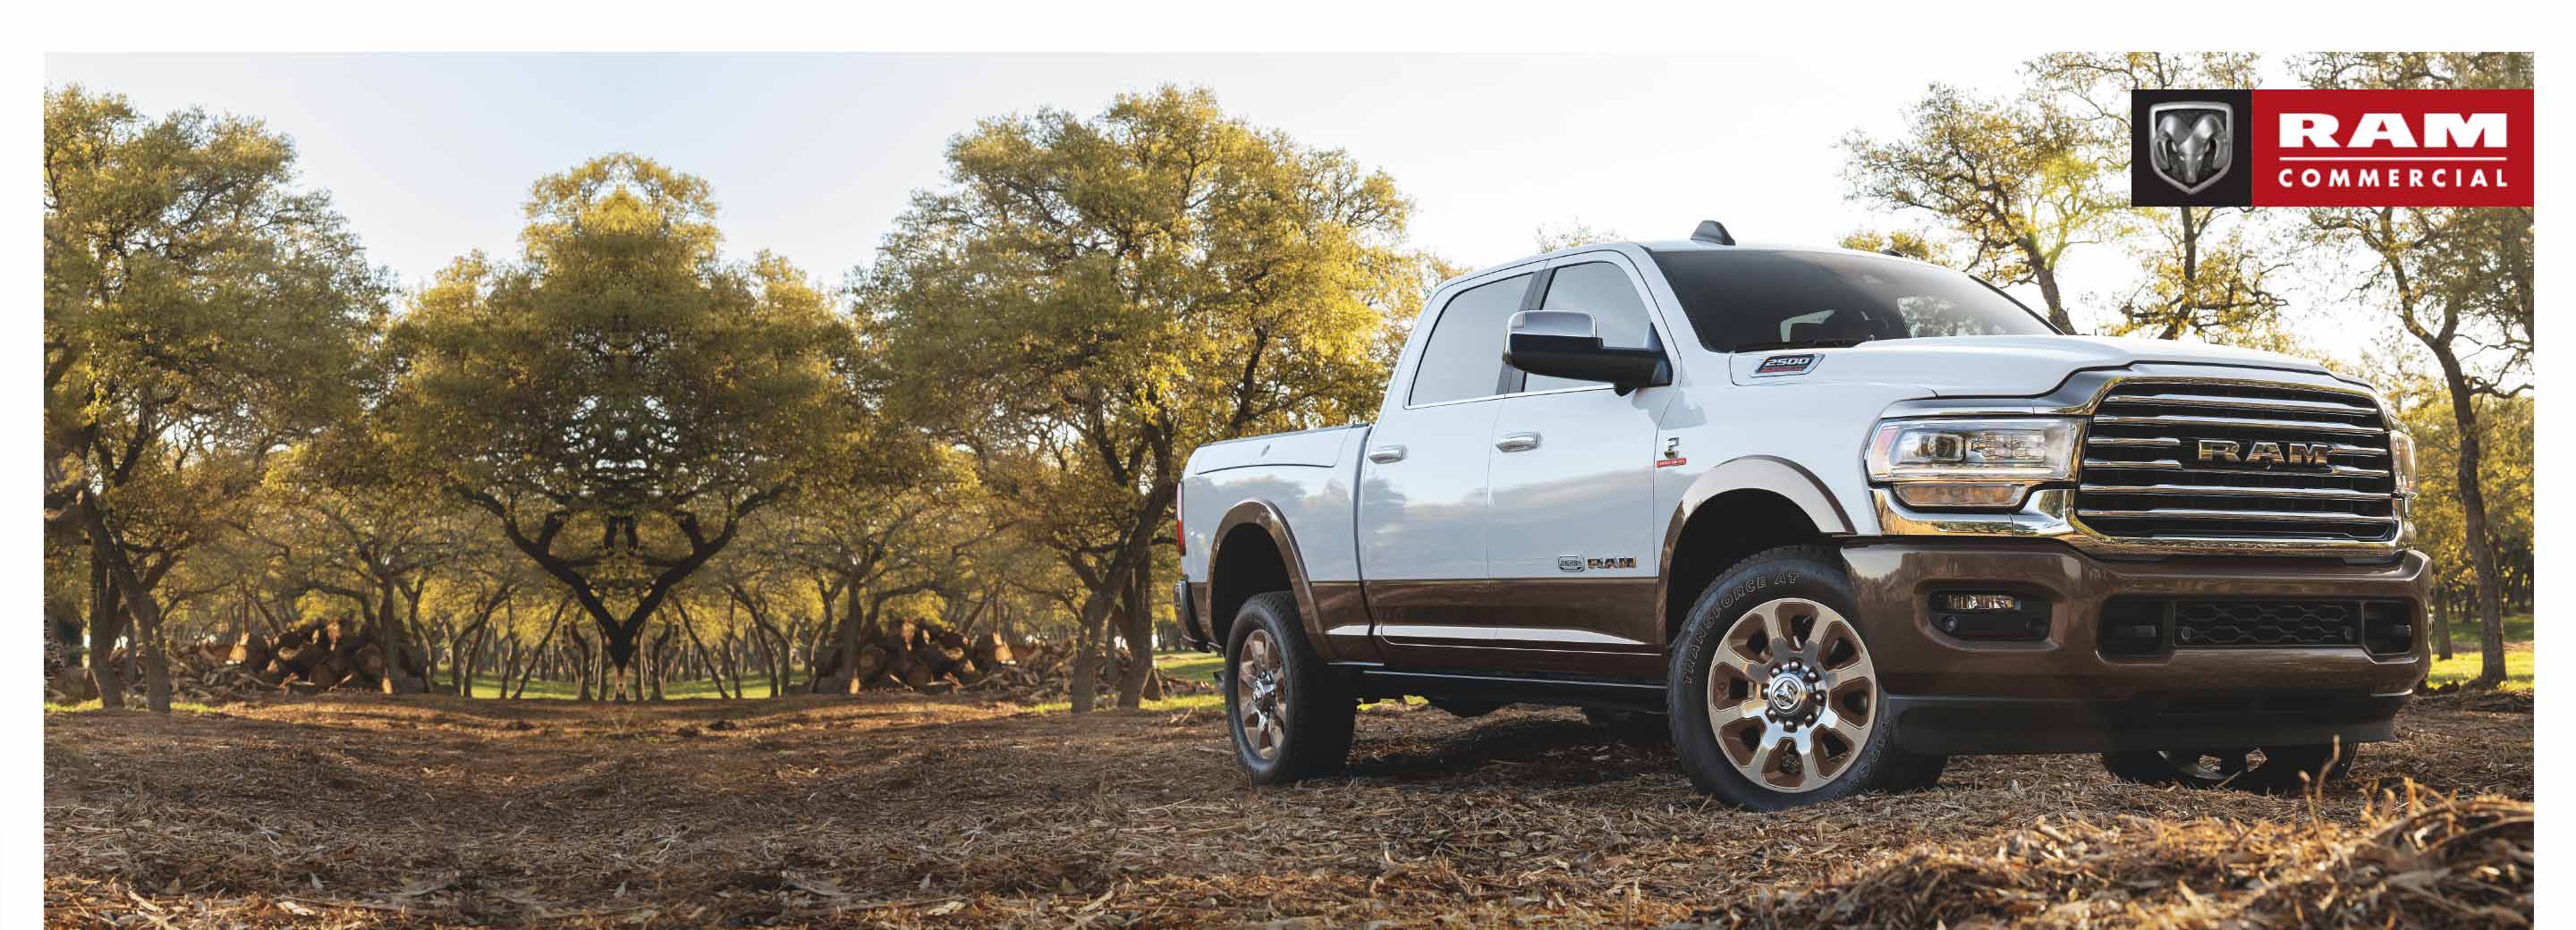 A 2021 Ram 2500 Limited Longhorn 4x4 parked in an orchard. The Ram Commercial logo.